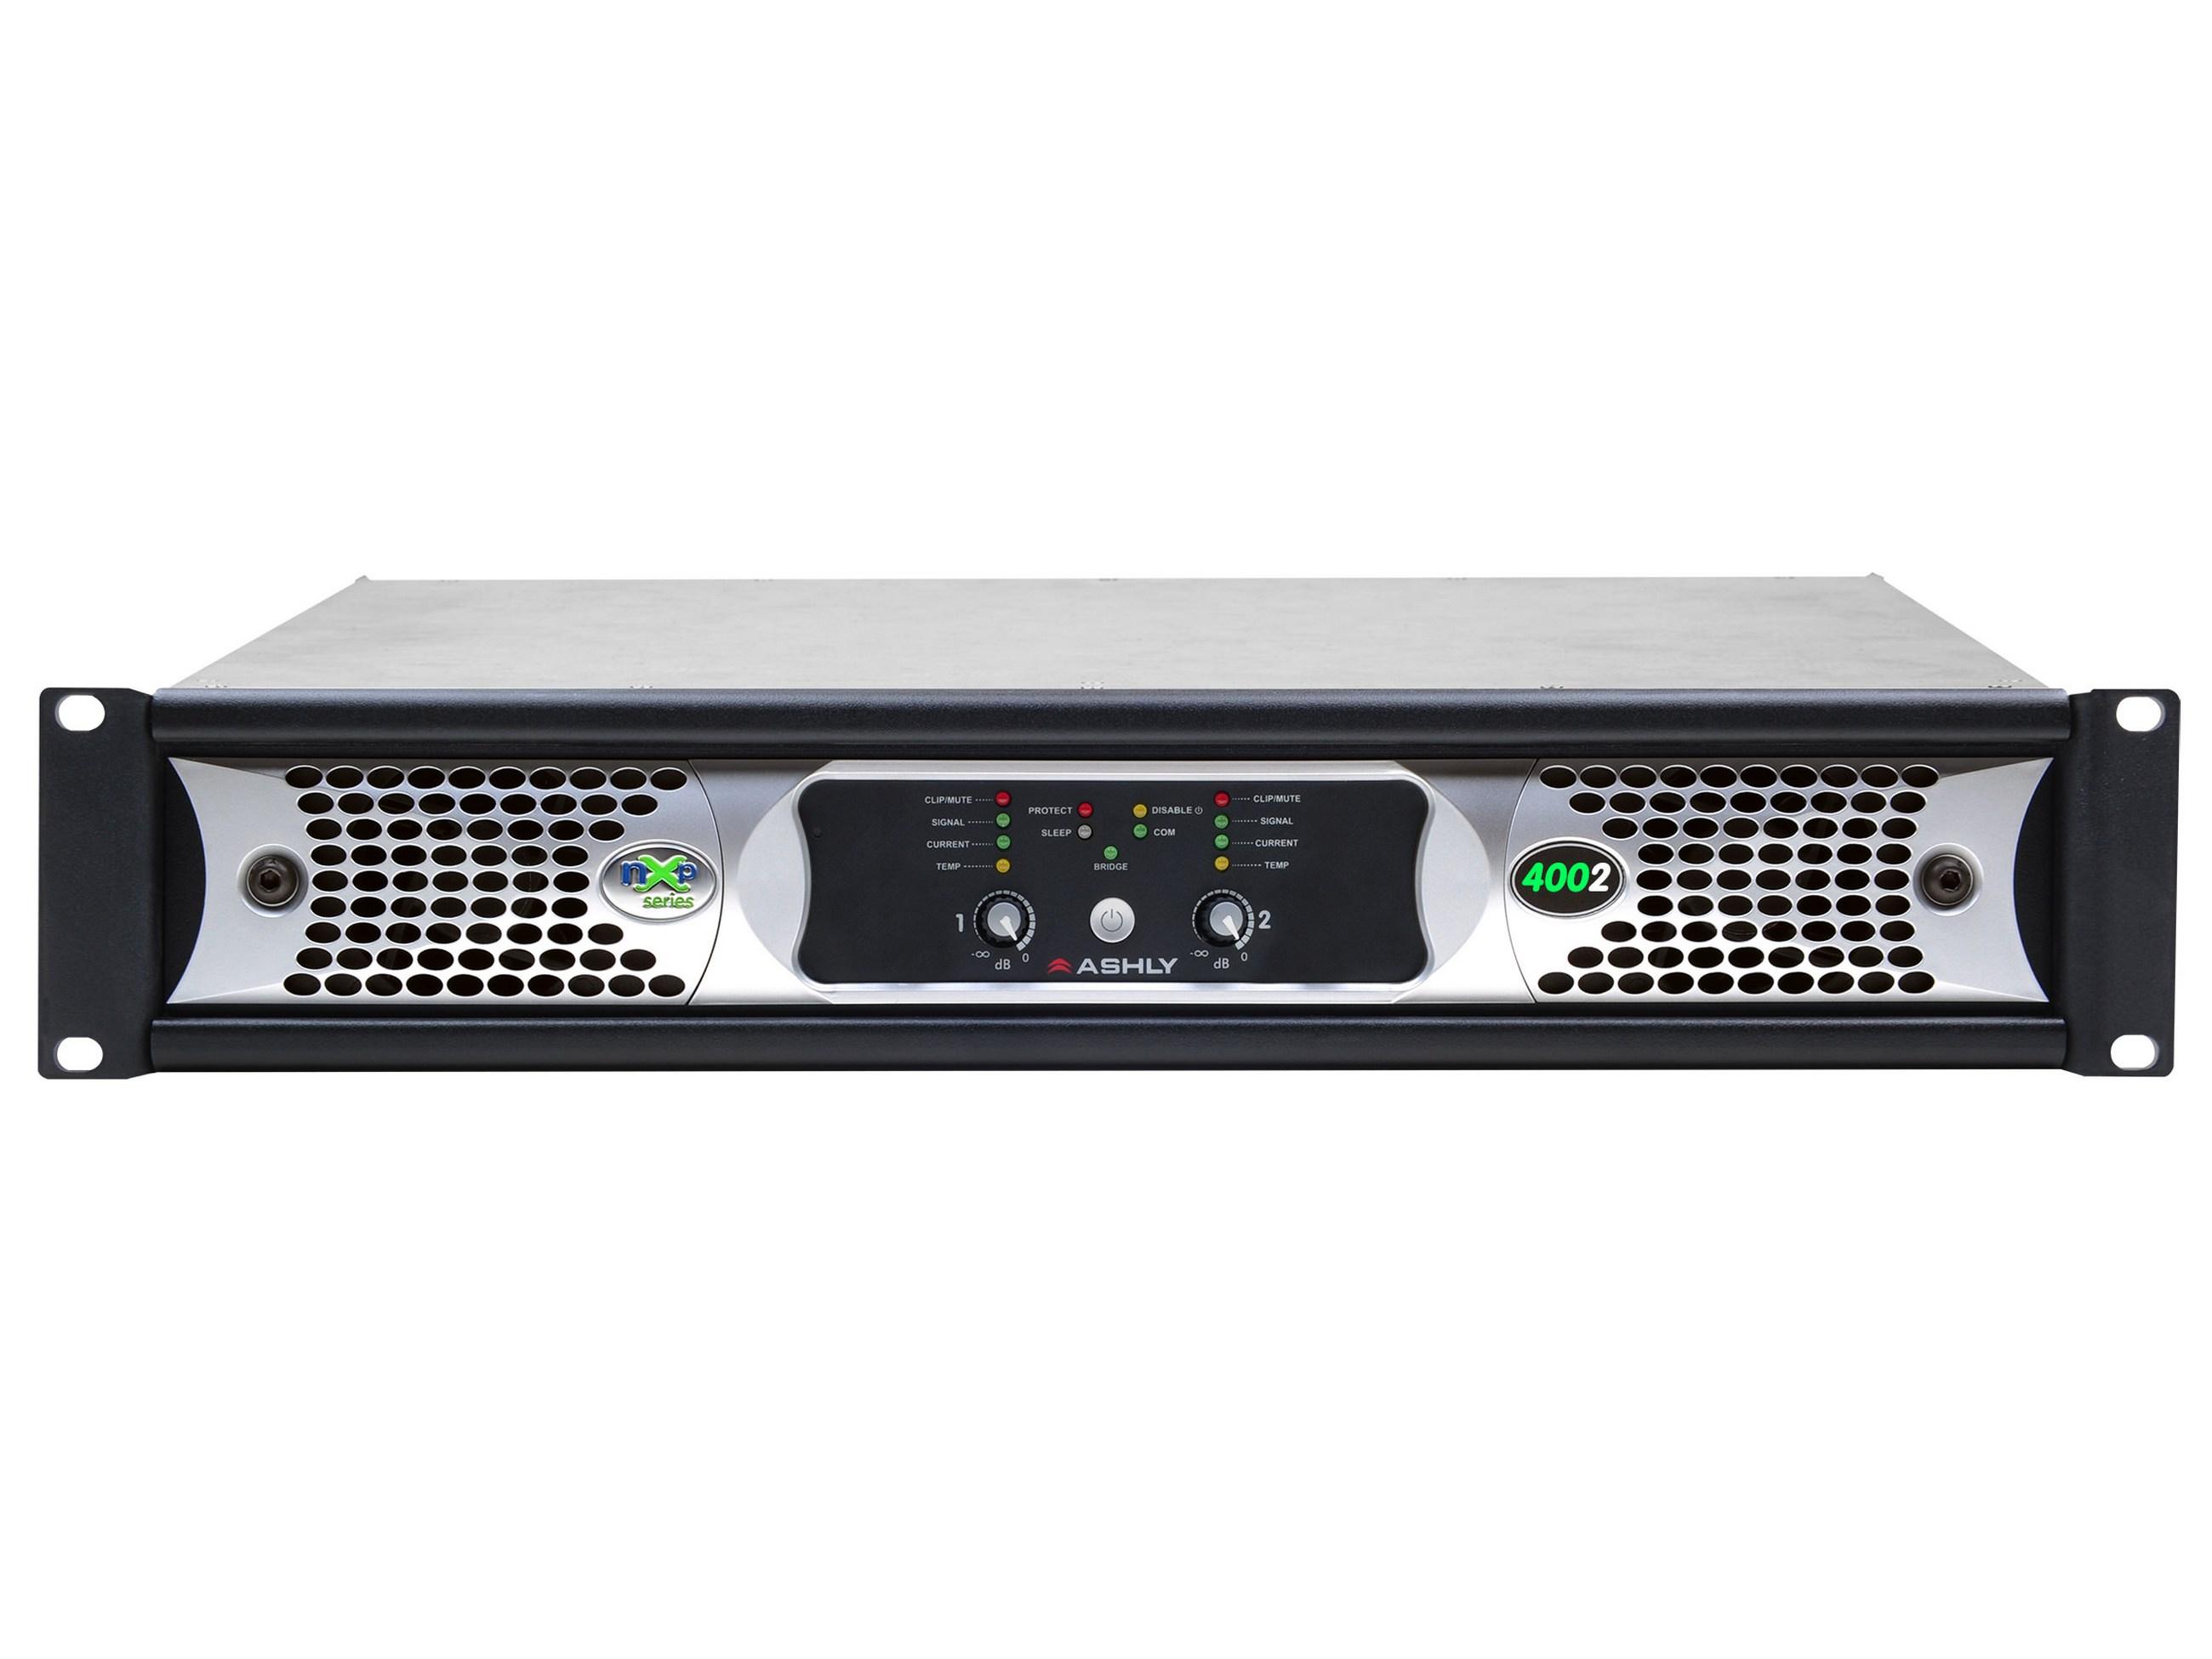 nXp4002d 2x 400 Watts/2 Ohms Network Power Amplifier with Protea DSP and OPDante Option Card by Ashly